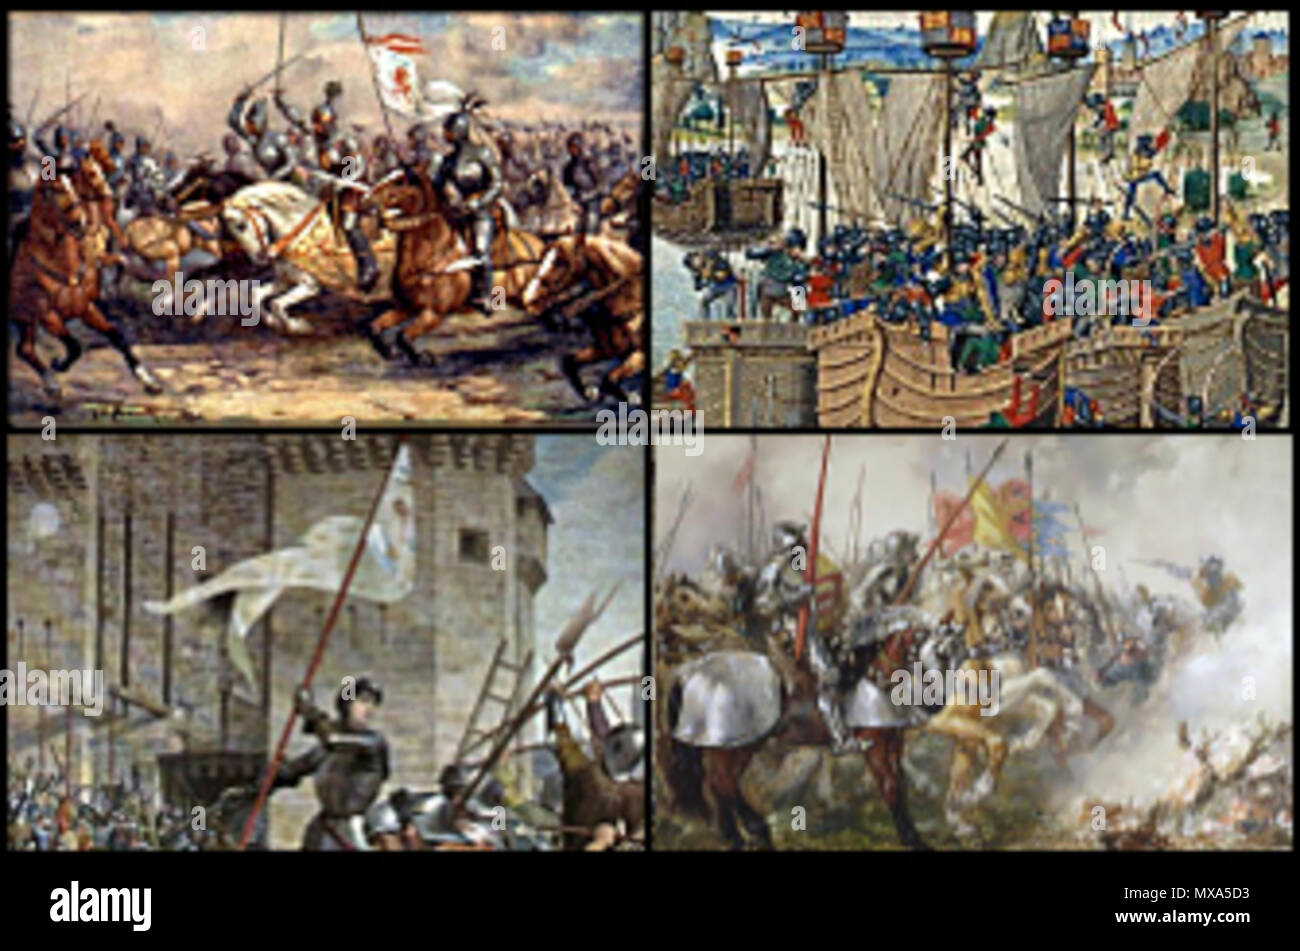 . Montage of paintings representing key battles of the Hundred Years' War. Clockwise, from top left: Crécy, La Rochelle, Agincourt, Orléans. 6 March 2010. See images below. 288 Hundred Years' War montage Stock Photo